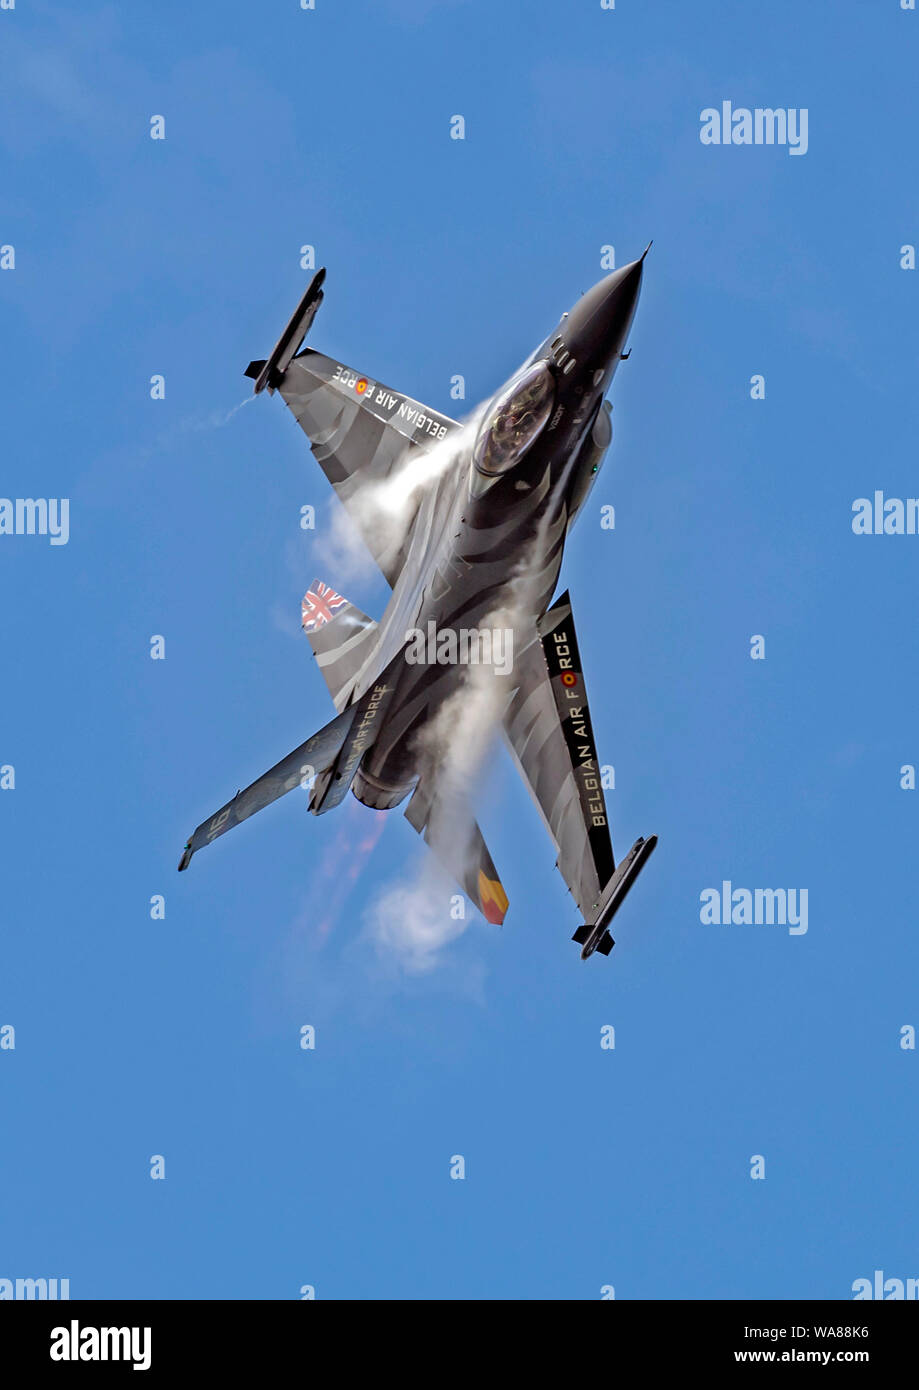 Belgian Air Force F-16AM Fighting Falcon 'Vador'  at the Royal International Air Tattoo 2019 Stock Photo